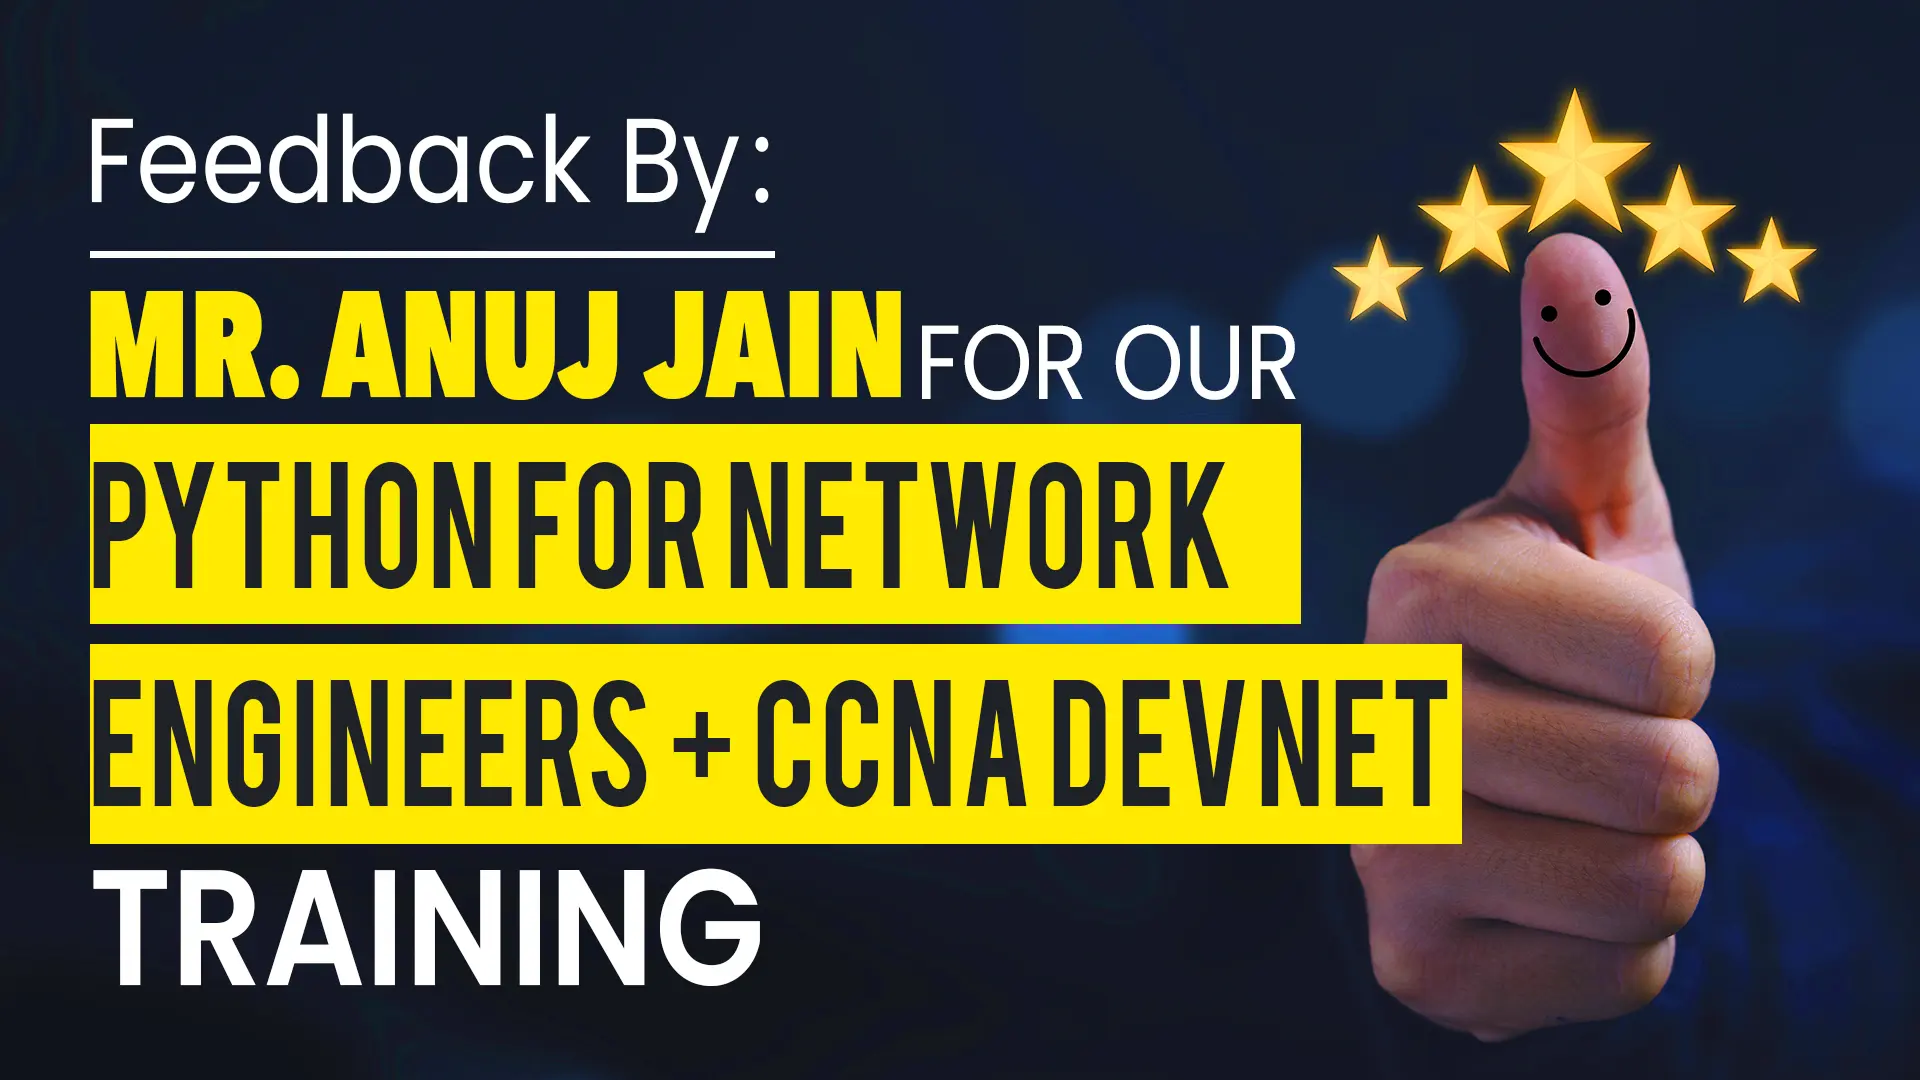 Feedback from Anuj-Jain for CCNA Devnet course